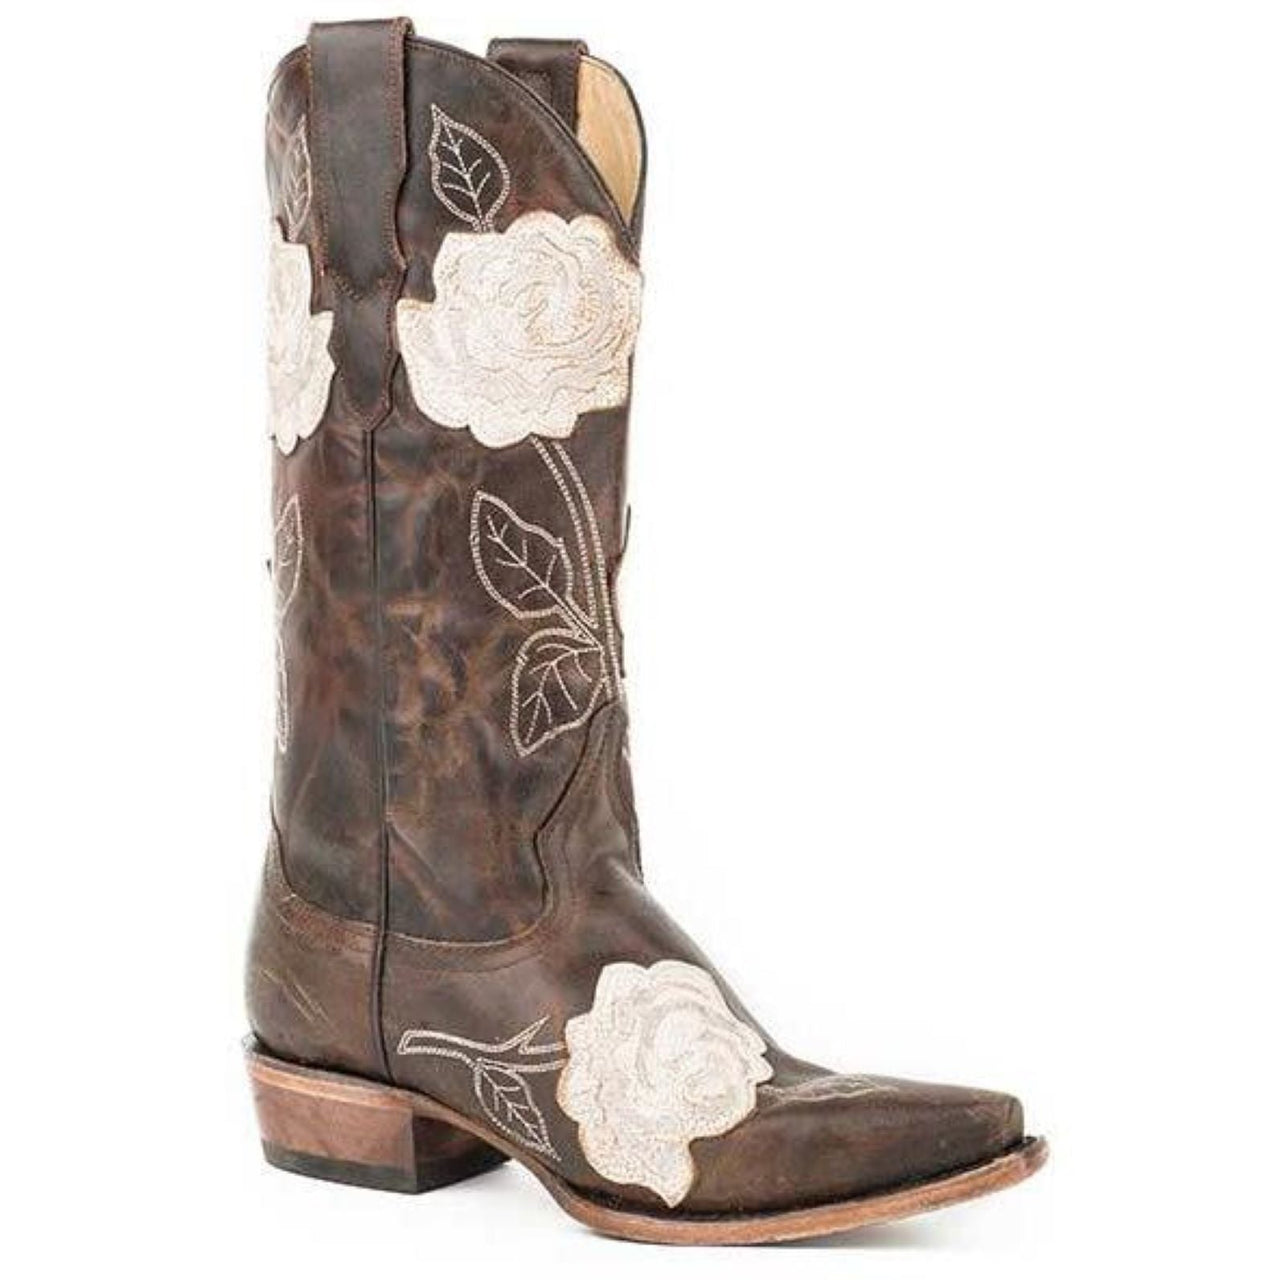 Women's Stetson Fiona Leather Boots Handcrafted Brown - yeehawcowboy